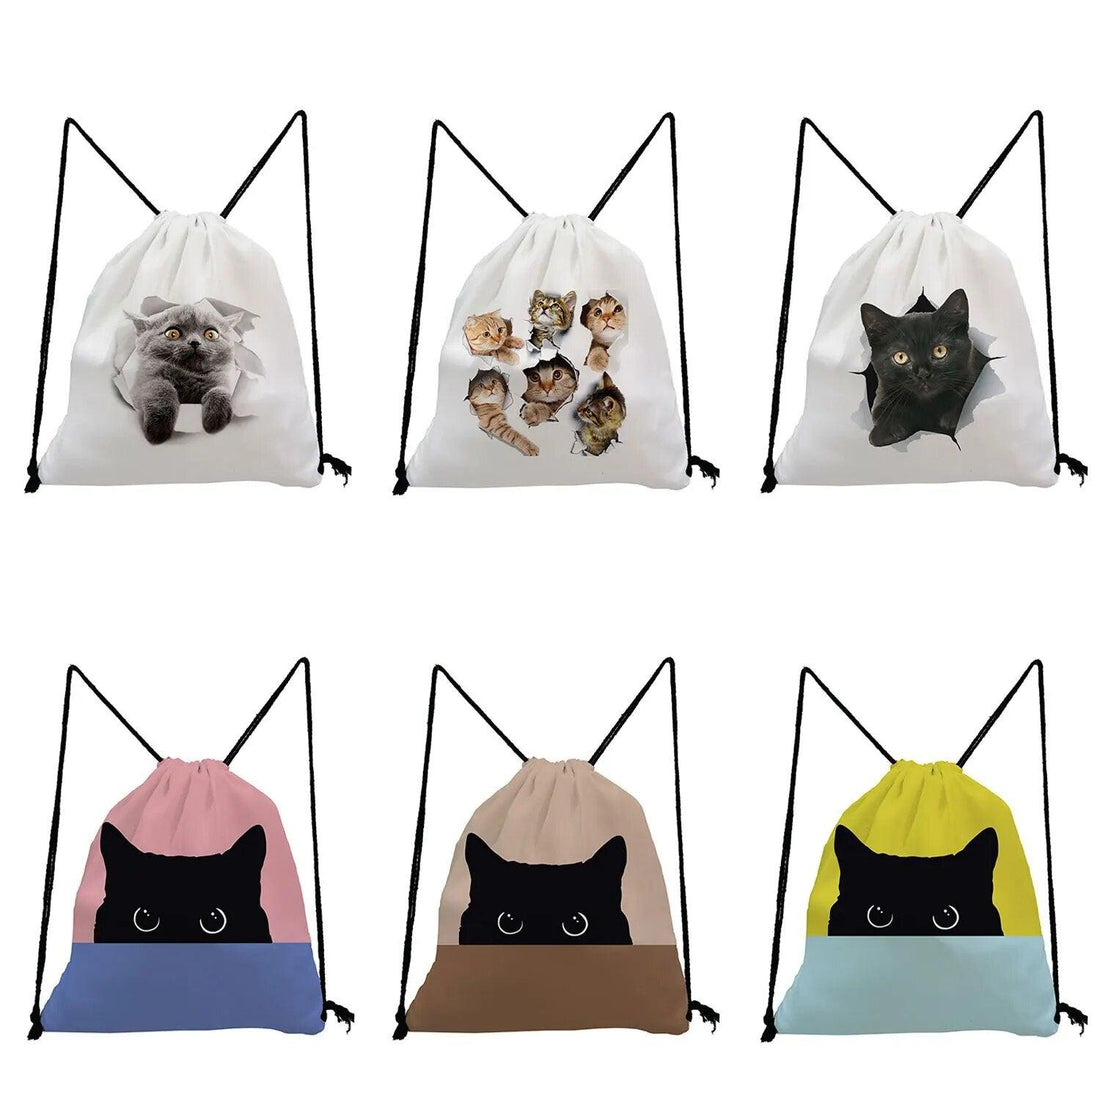 Cat Printed Drawstring Backpack, 13 varieties - Just Cats - Gifts for Cat Lovers